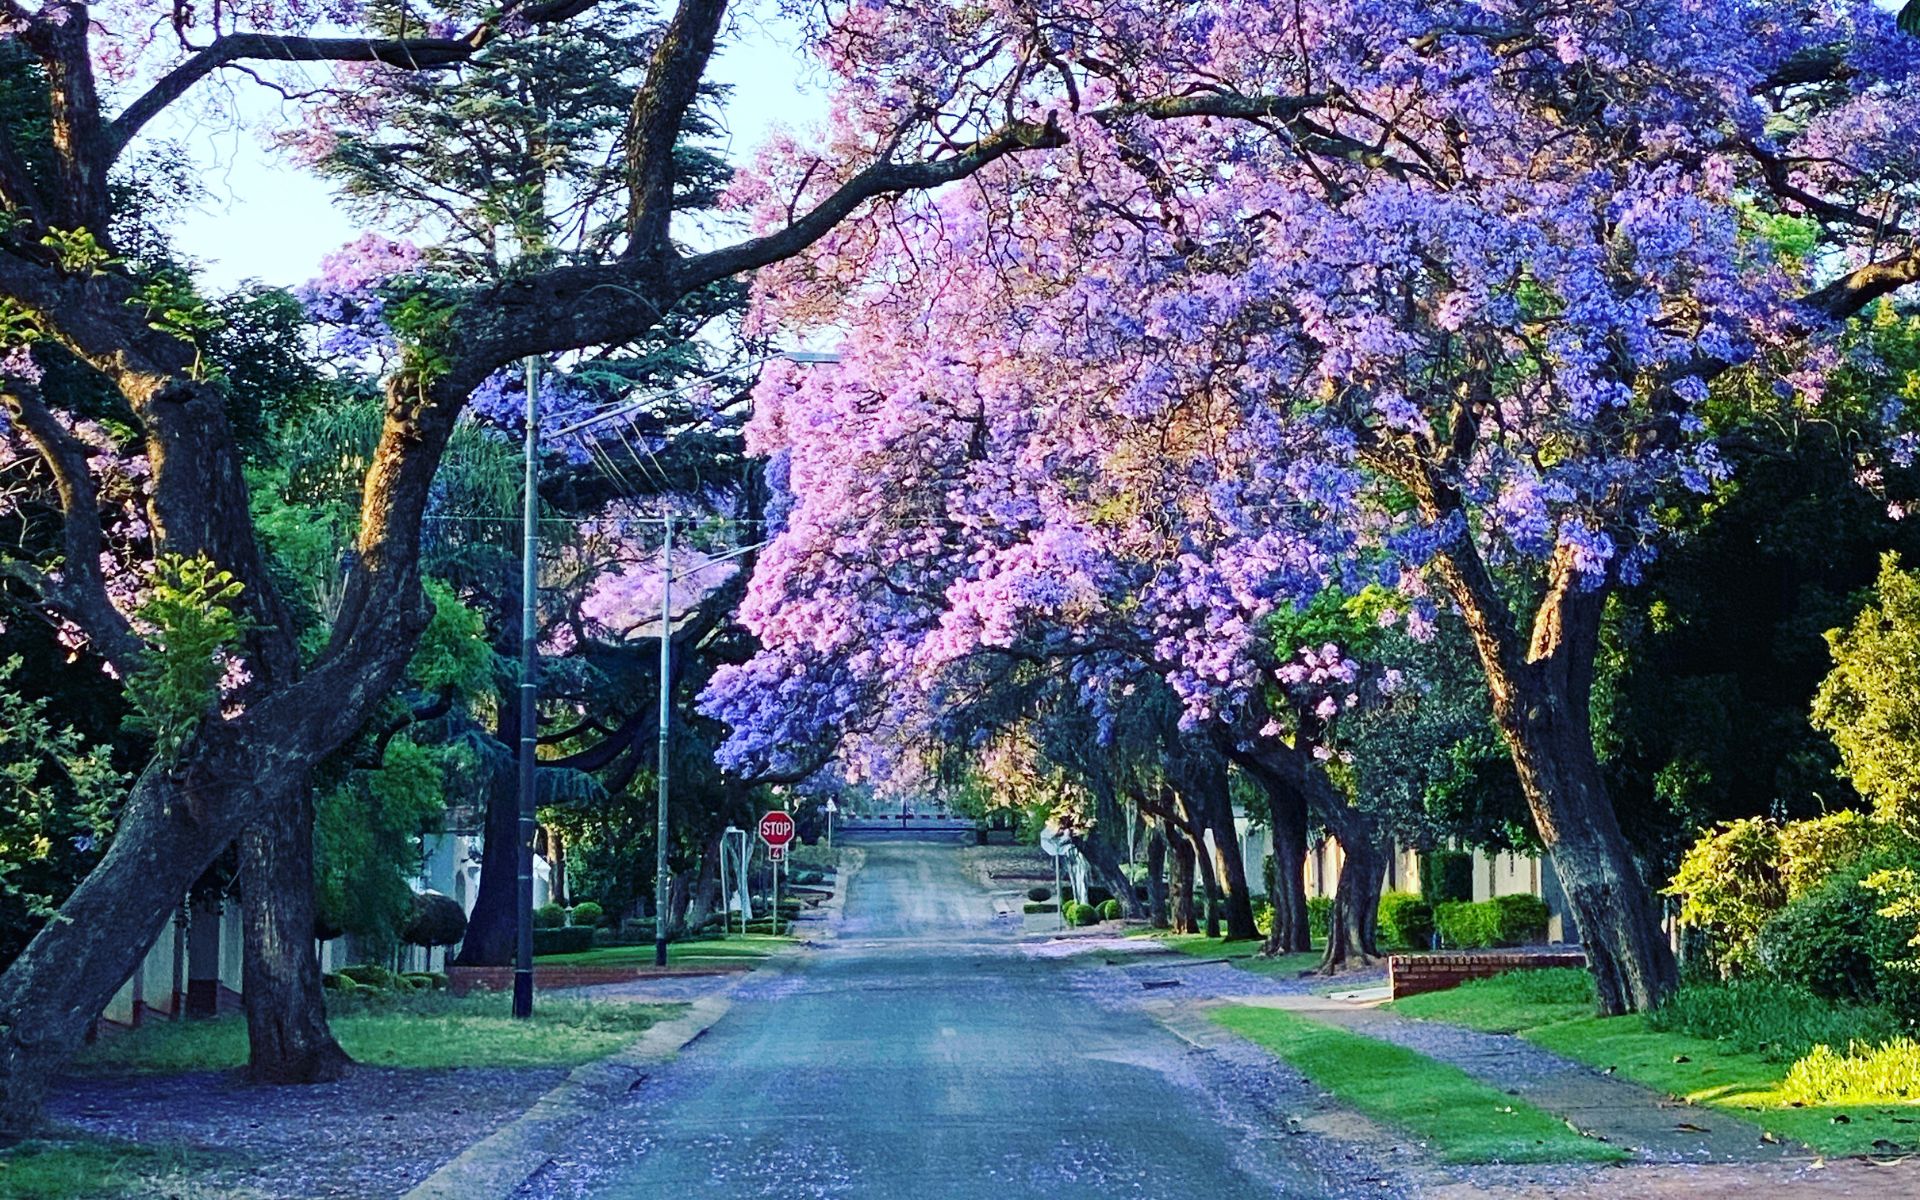 Vibrant Jacaranda tree in full bloom, showcasing its lavender-blue flowers and lush foliage in a beautifully landscaped sidewalk.